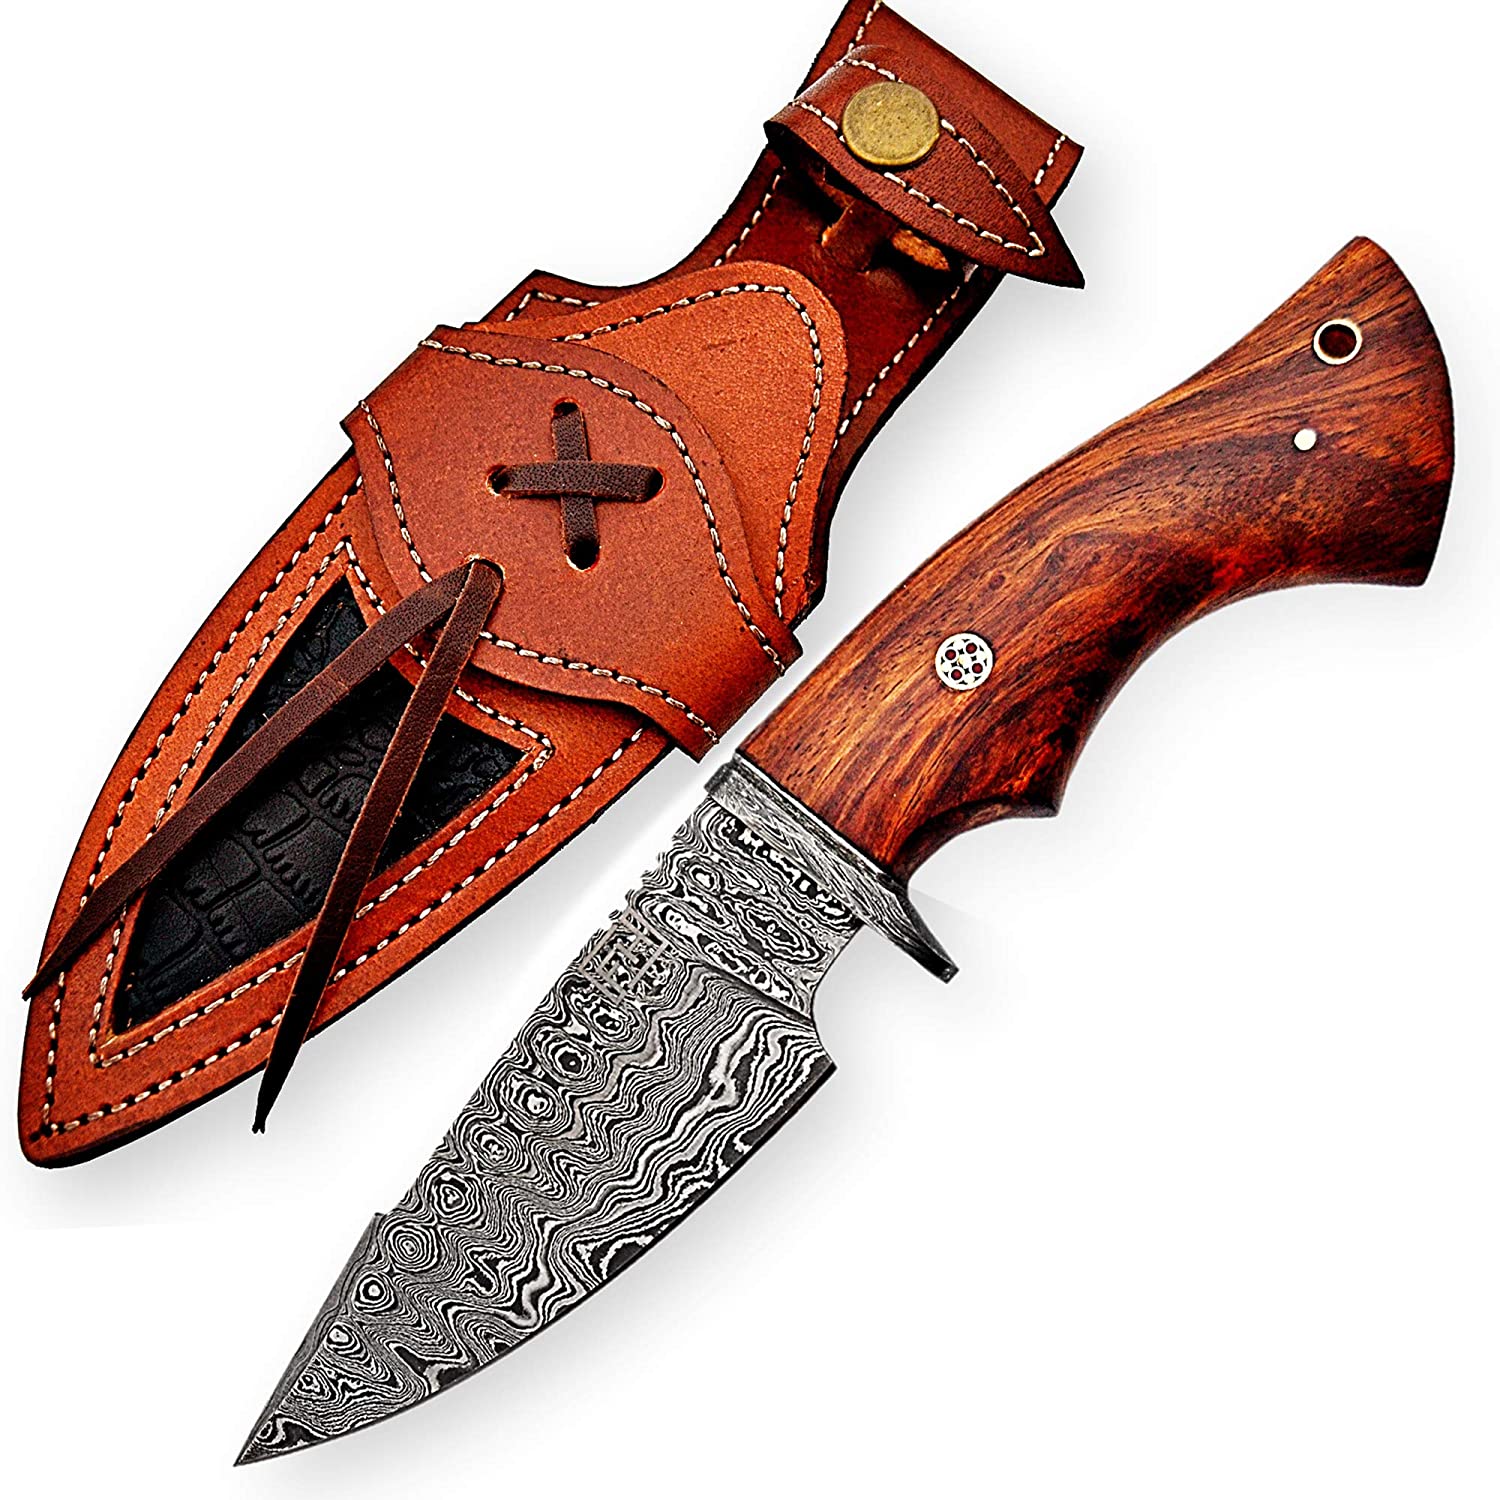 Fh Knives 10 Inch Damascus Knife Handmade Hunting Knife With Sheath